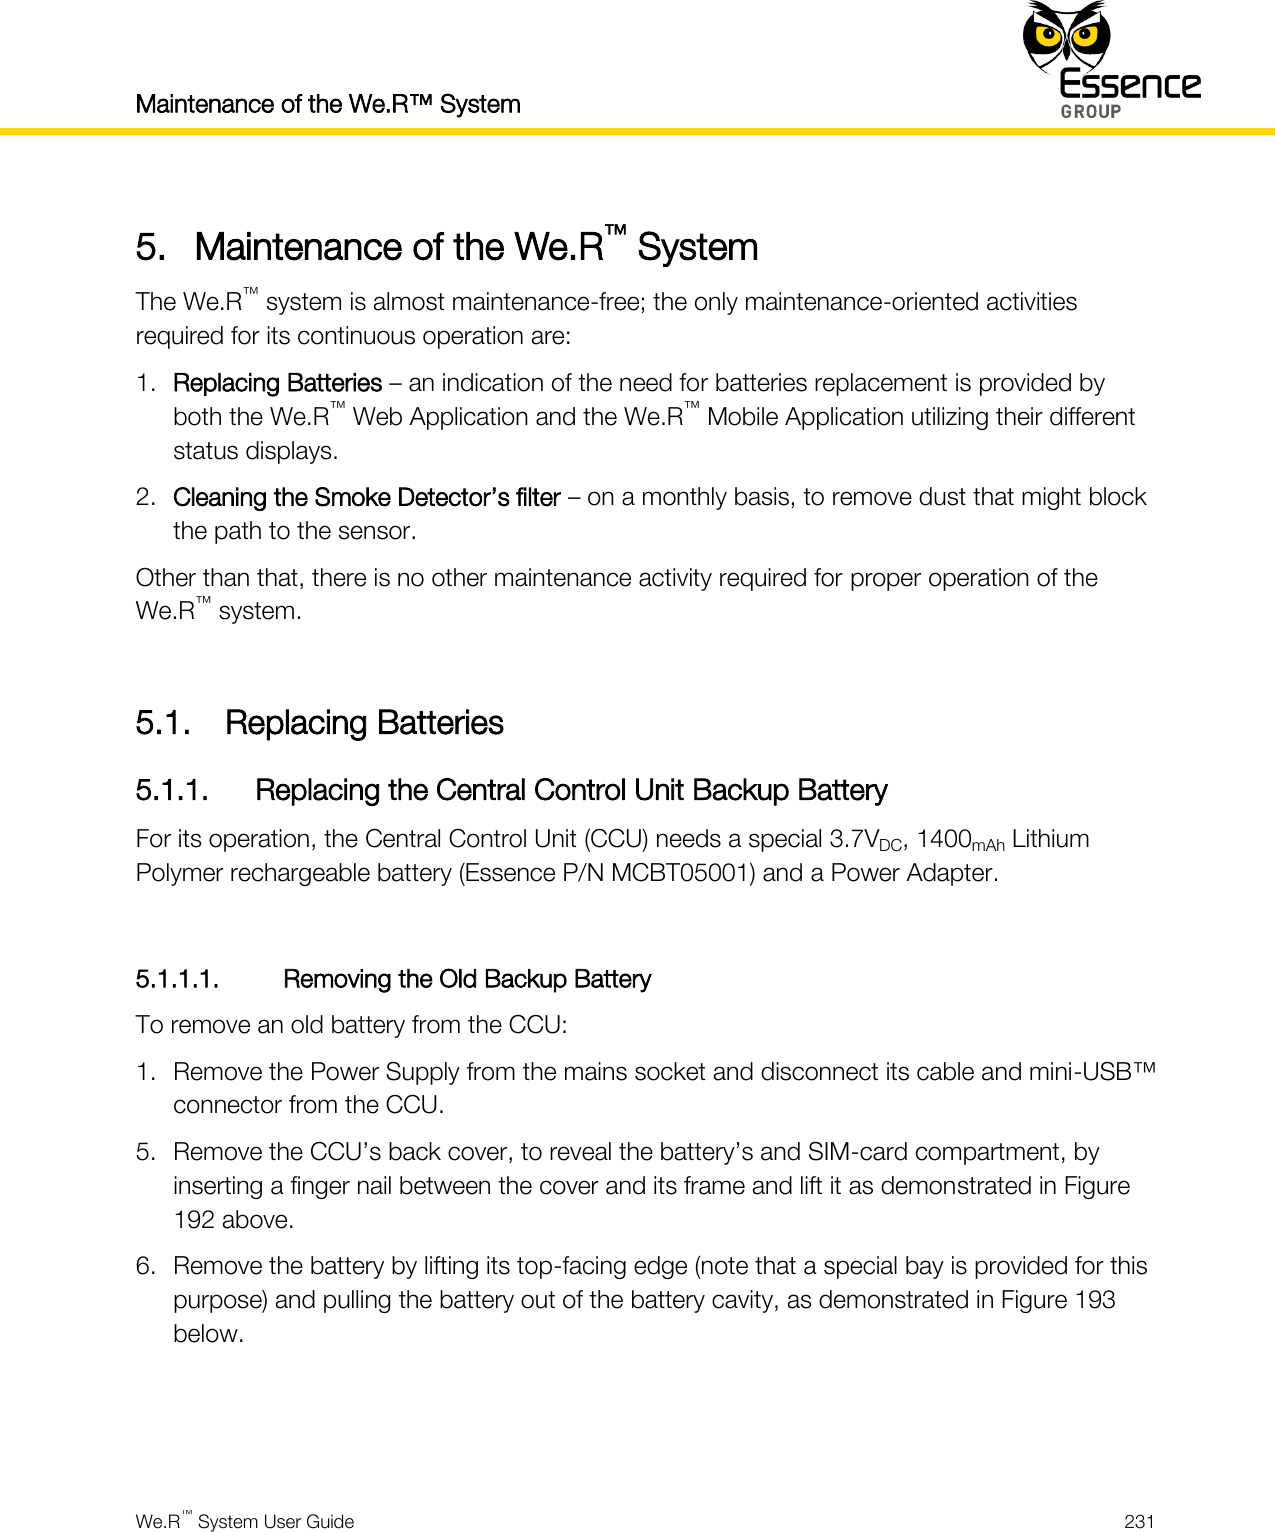 Maintenance of the We.R™ System    We.R™ System User Guide  231  5. Maintenance of the We.R™ System The We.R™ system is almost maintenance-free; the only maintenance-oriented activities required for its continuous operation are: 1. Replacing Batteries – an indication of the need for batteries replacement is provided by both the We.R™ Web Application and the We.R™ Mobile Application utilizing their different status displays. 2. Cleaning the Smoke Detector’s filter – on a monthly basis, to remove dust that might block the path to the sensor. Other than that, there is no other maintenance activity required for proper operation of the We.R™ system.  5.1. Replacing Batteries 5.1.1. Replacing the Central Control Unit Backup Battery For its operation, the Central Control Unit (CCU) needs a special 3.7VDC, 1400mAh Lithium Polymer rechargeable battery (Essence P/N MCBT05001) and a Power Adapter.  5.1.1.1. Removing the Old Backup Battery To remove an old battery from the CCU: 1. Remove the Power Supply from the mains socket and disconnect its cable and mini-USB™ connector from the CCU. 5. Remove the CCU’s back cover, to reveal the battery’s and SIM-card compartment, by inserting a finger nail between the cover and its frame and lift it as demonstrated in Figure 192 above. 6. Remove the battery by lifting its top-facing edge (note that a special bay is provided for this purpose) and pulling the battery out of the battery cavity, as demonstrated in Figure 193 below.   